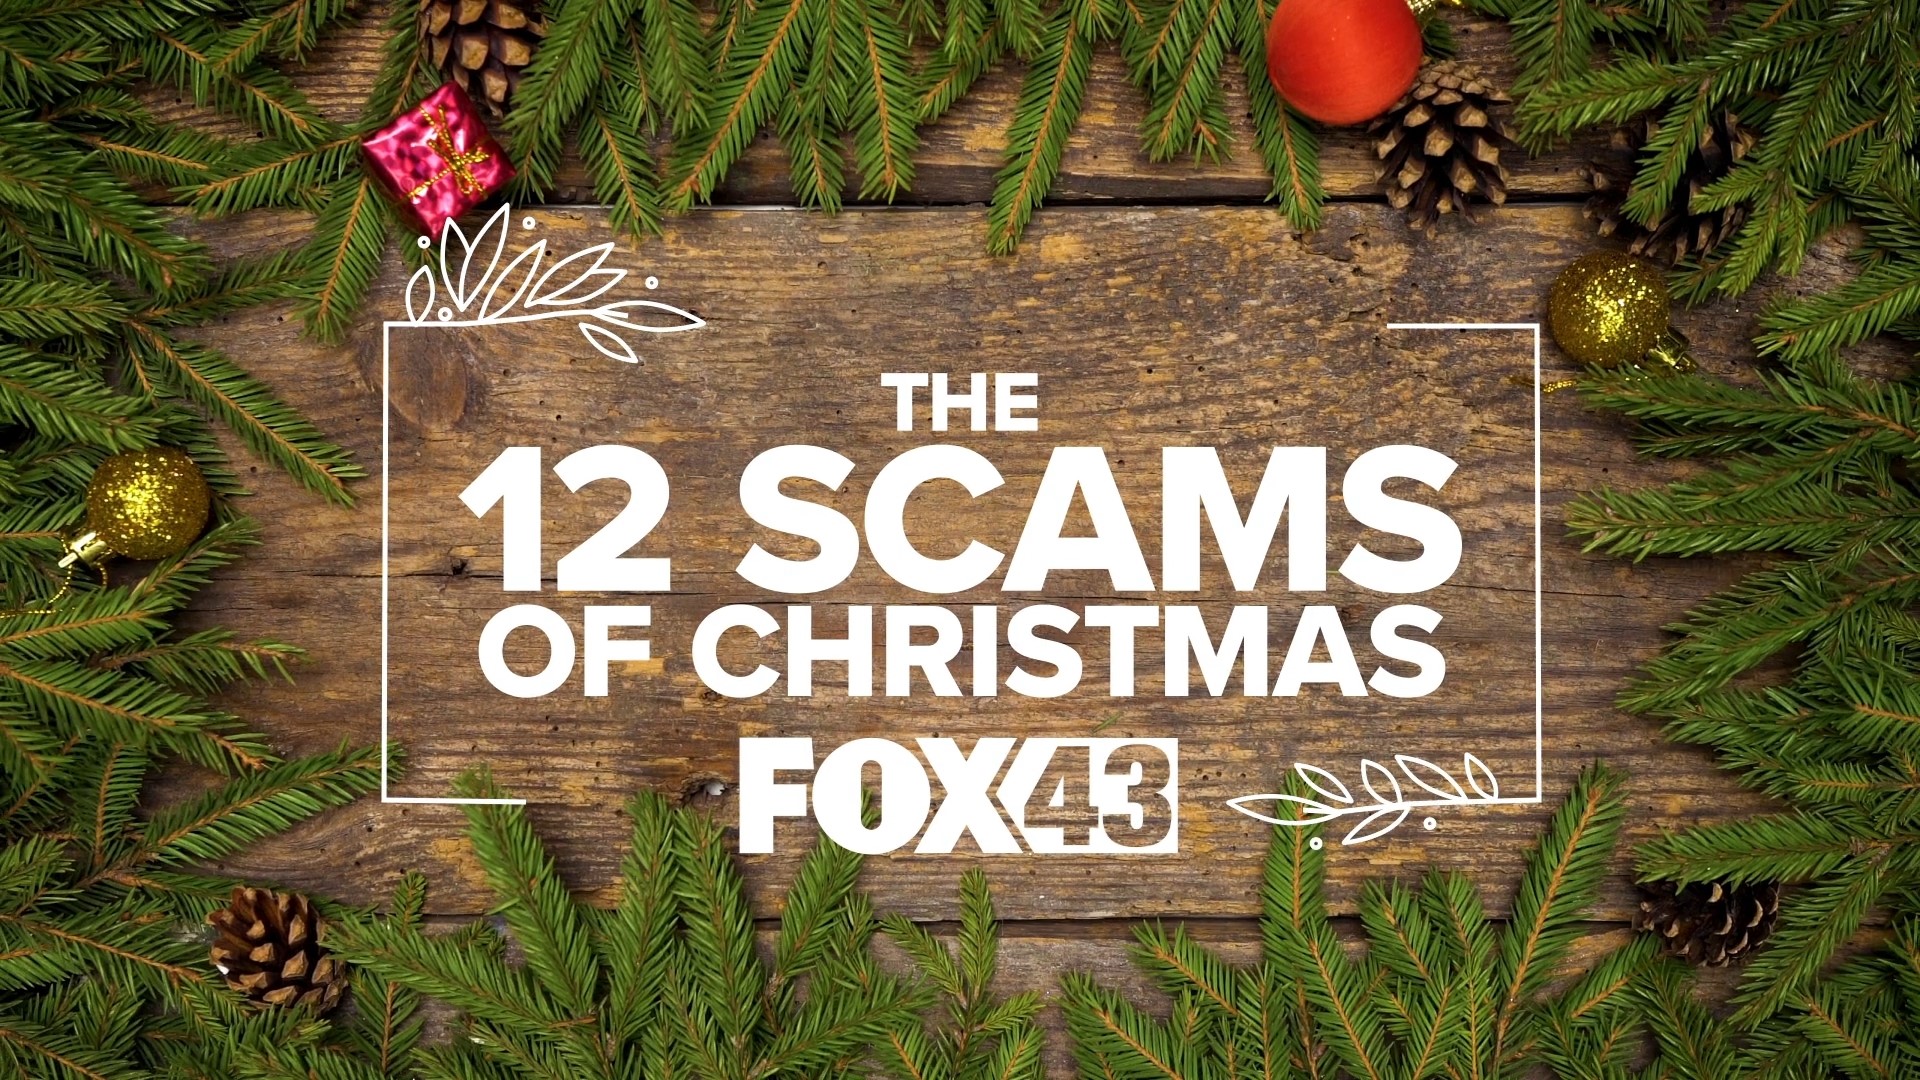 Fake shipping notifications make FOX43 Finds Out's 12 scams of Christmas.